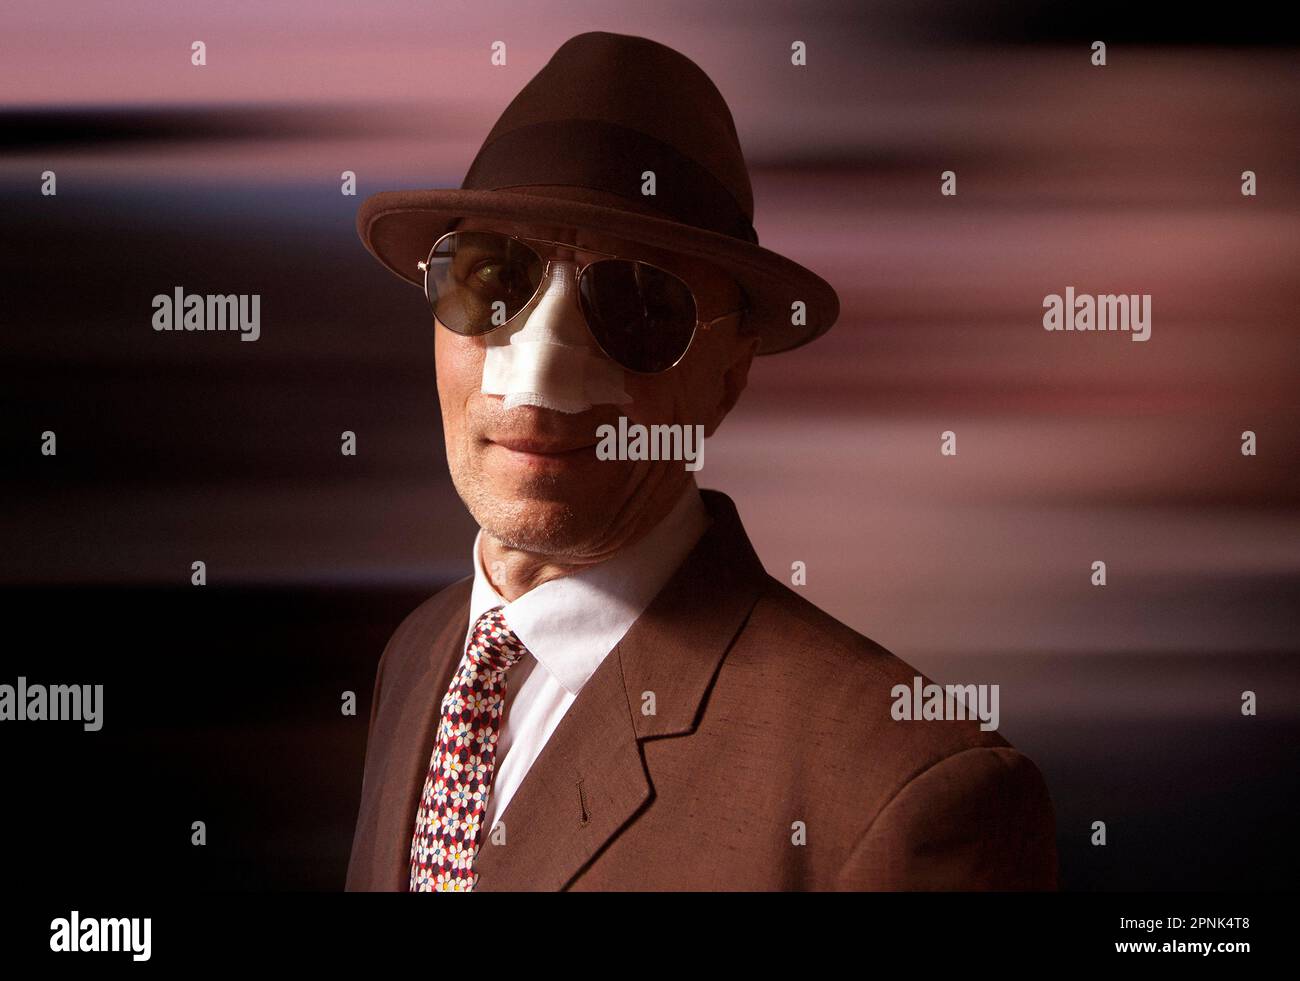 Man in suit, hat and sunglasses with bandage on his nose Stock Photo